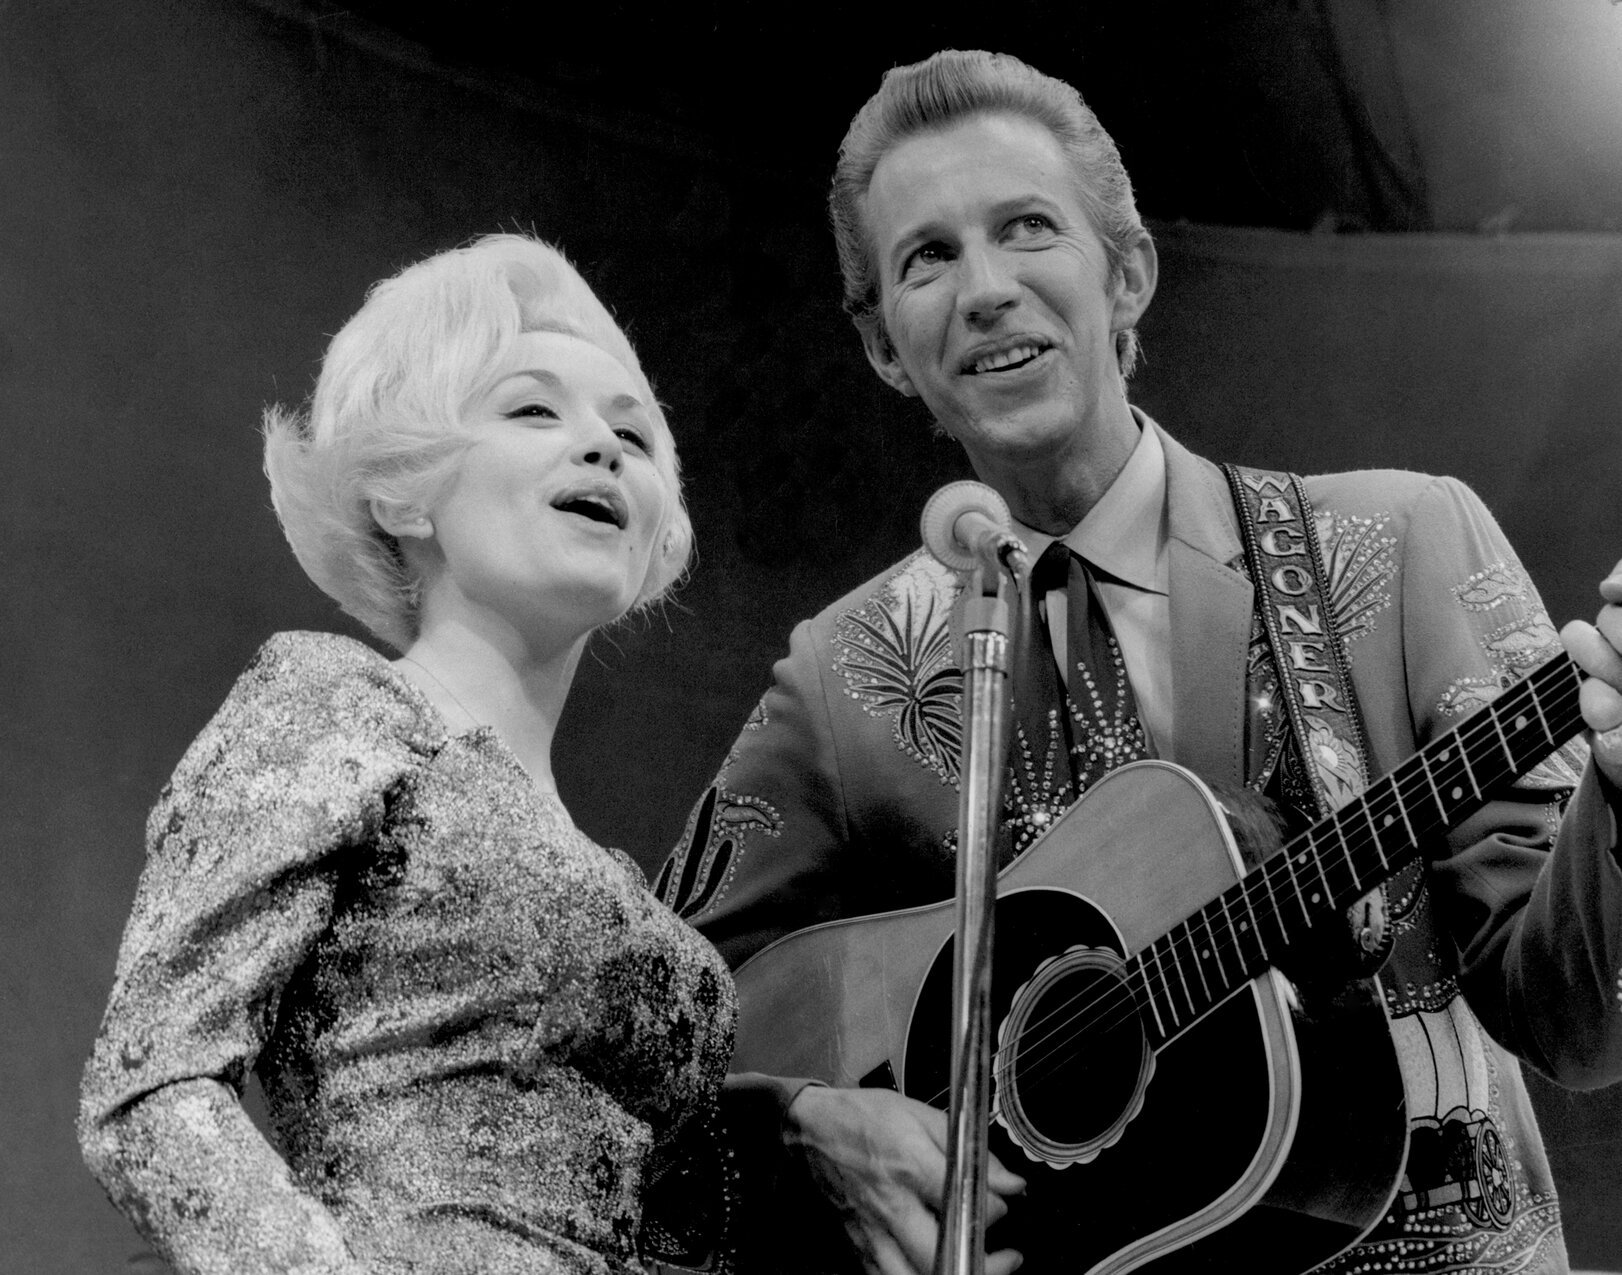 Dolly Parton and Porter Wagoner performing in 1967. The photo is in black and white.